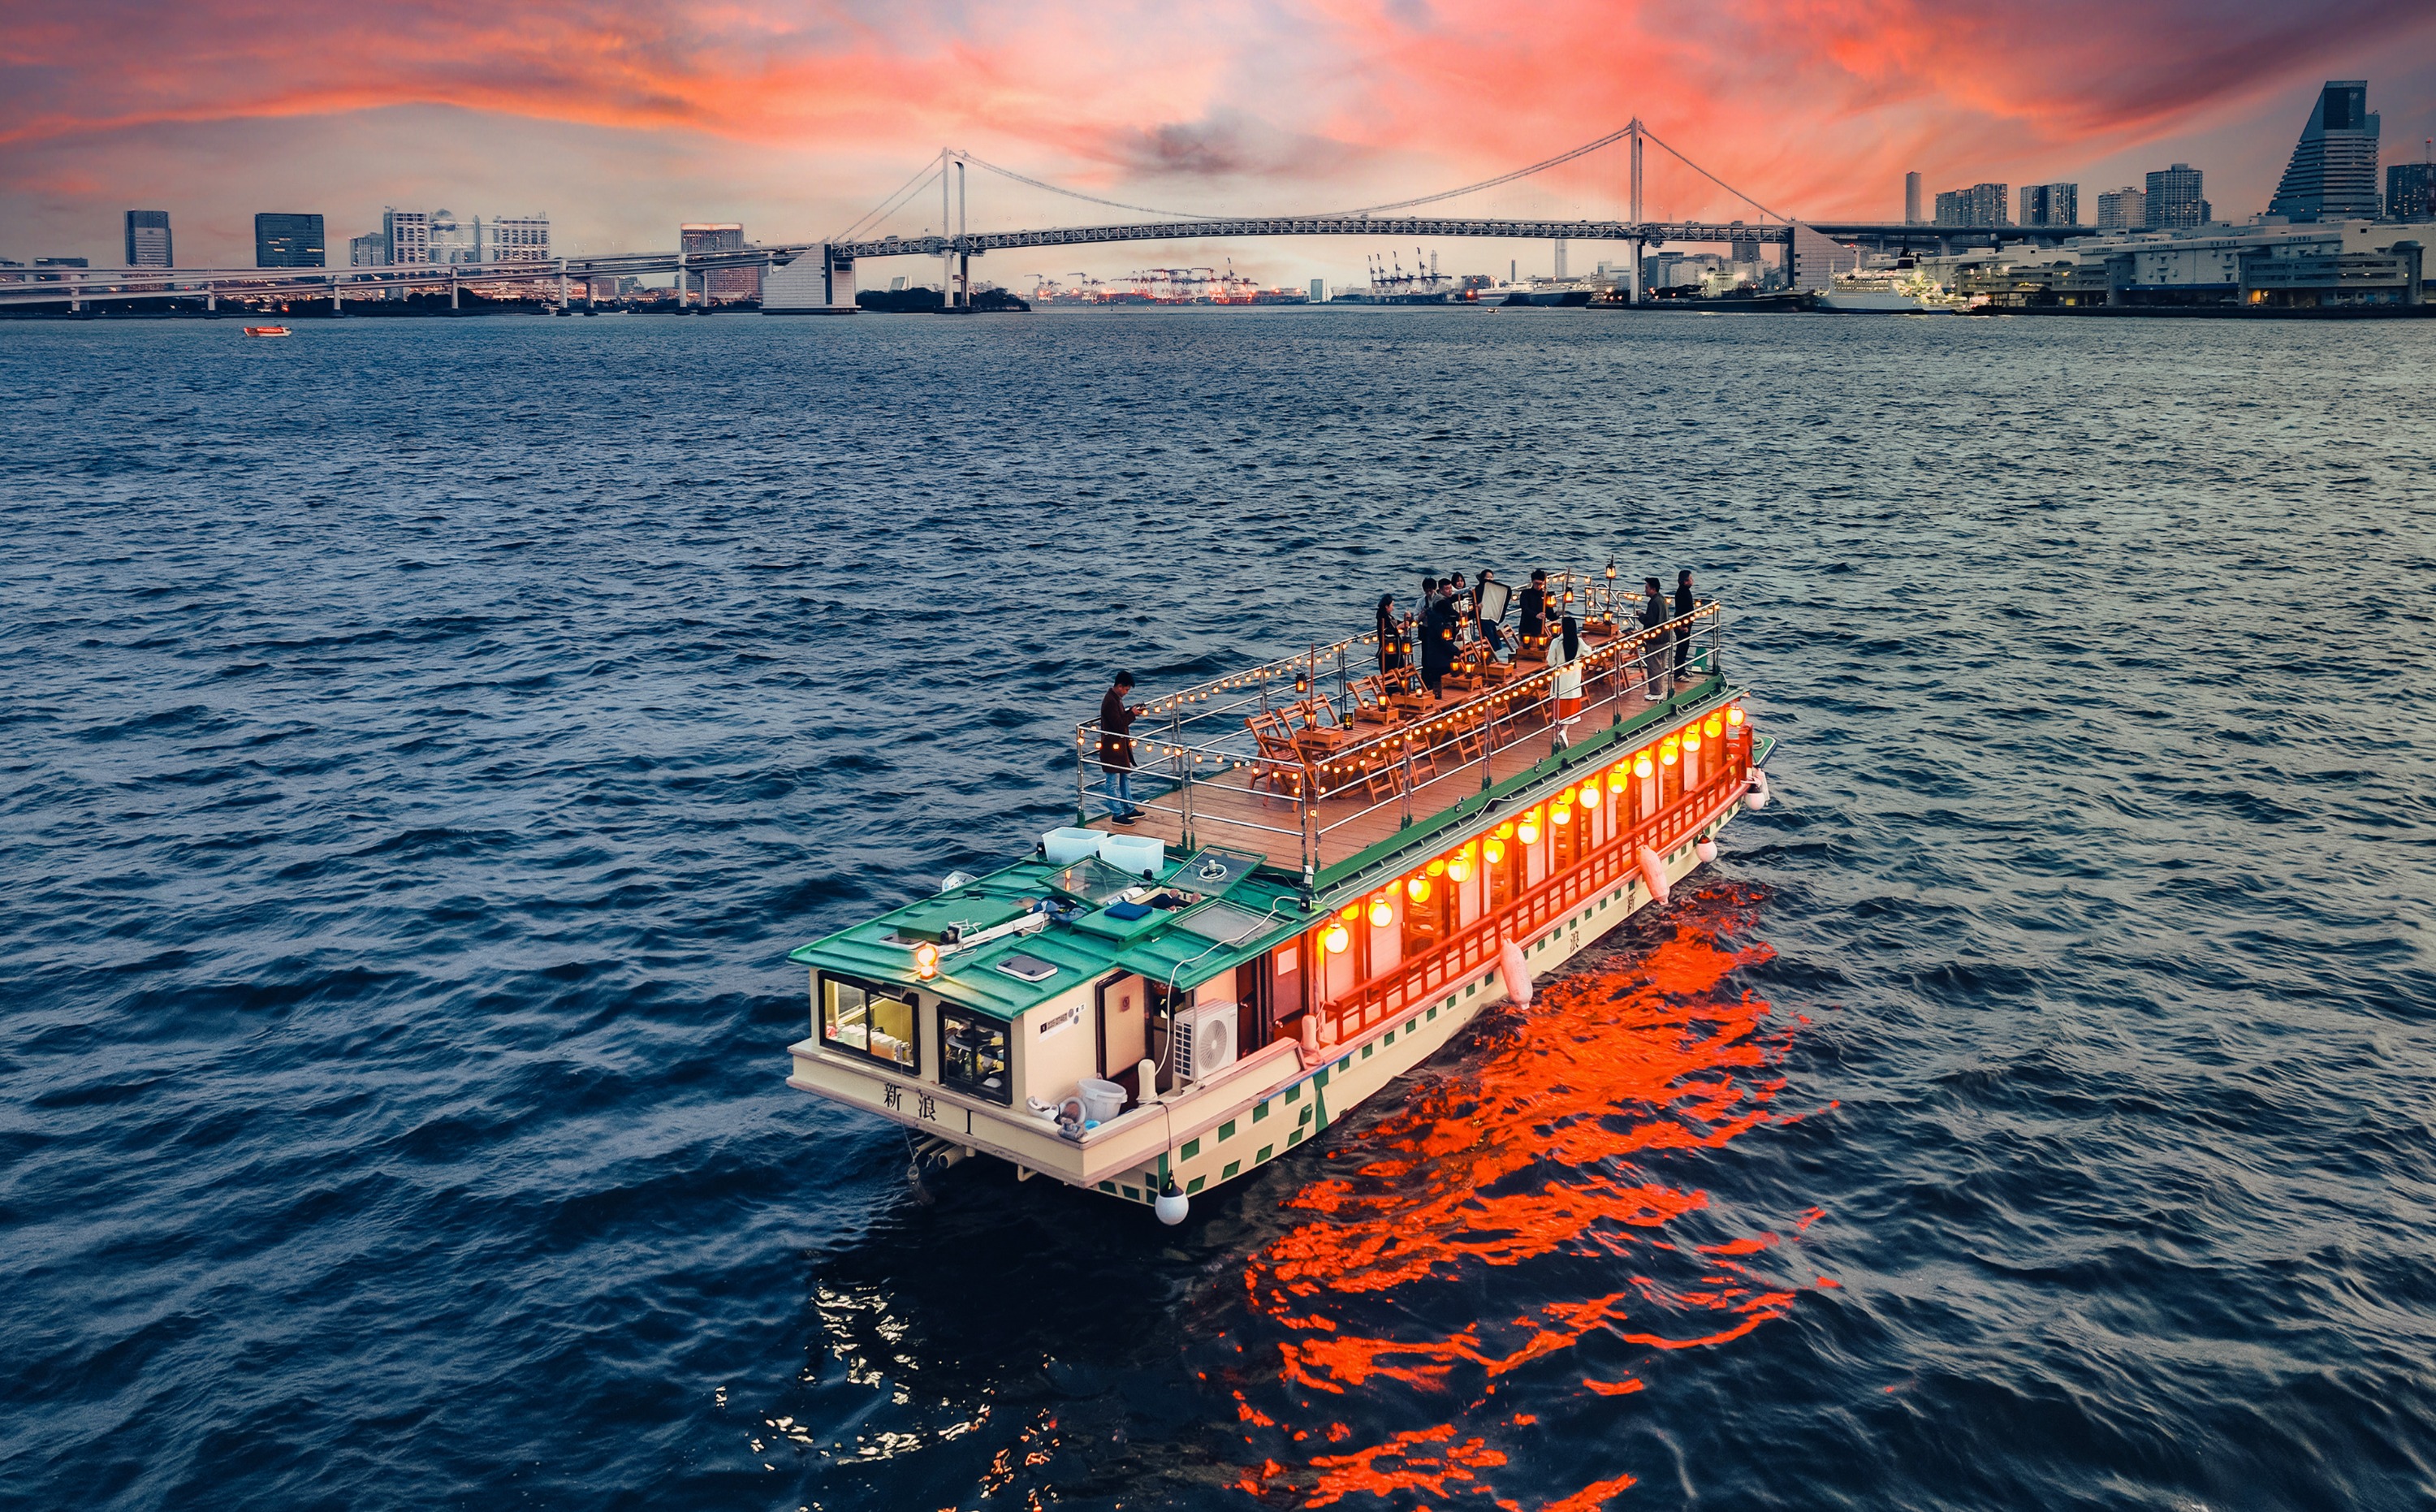 Yakatabune (House boat) Night Tour in Tokyo Bay with Dinner & Show